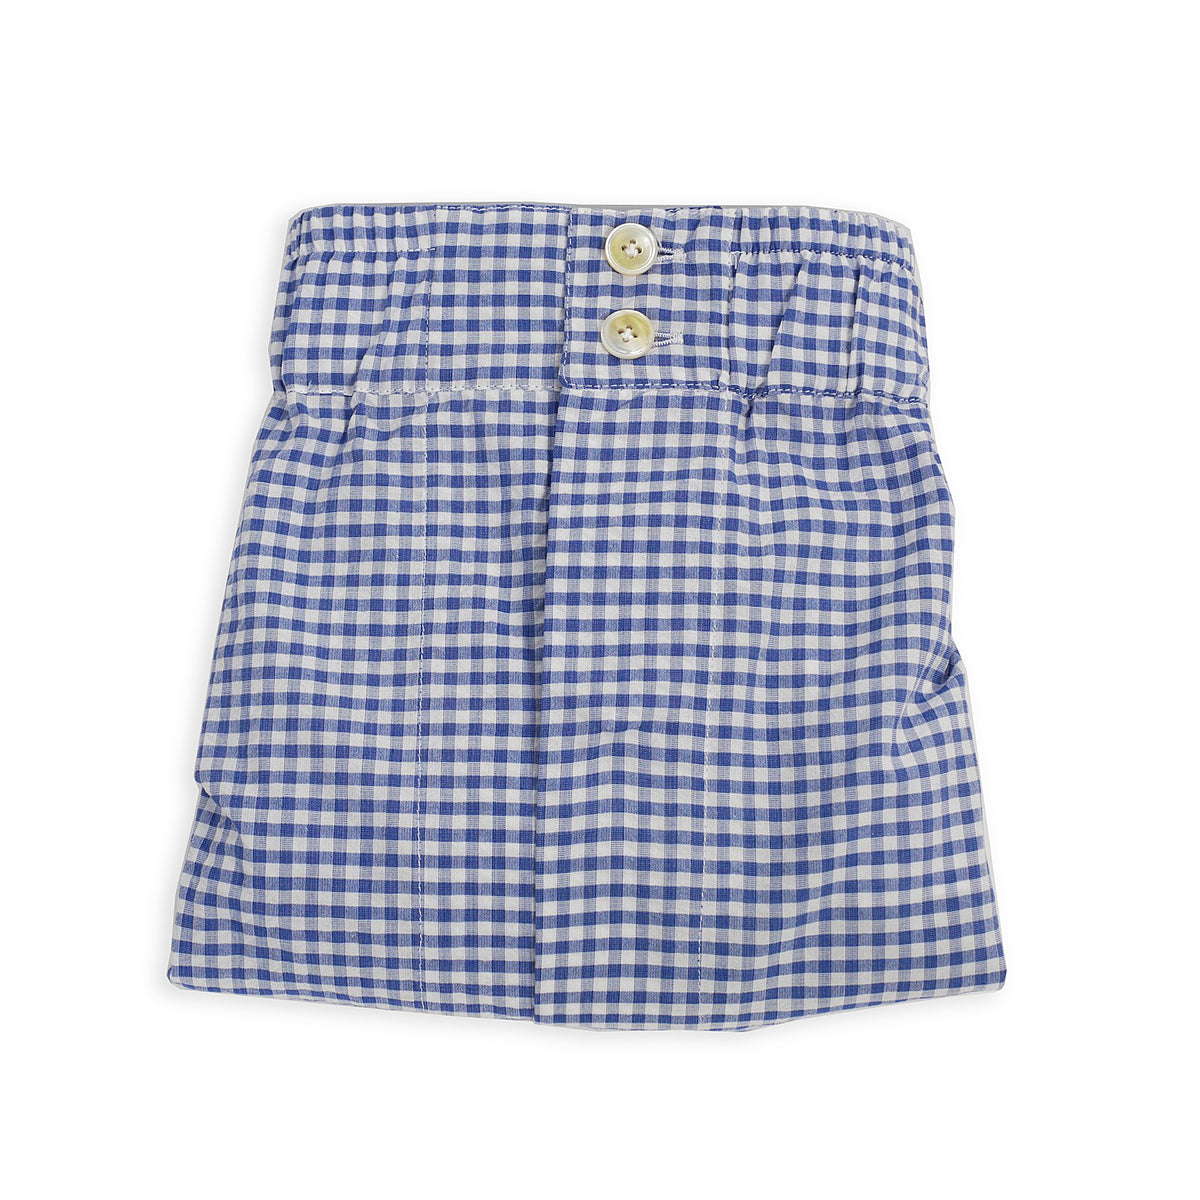 Boxer shorts blue checkered gray background